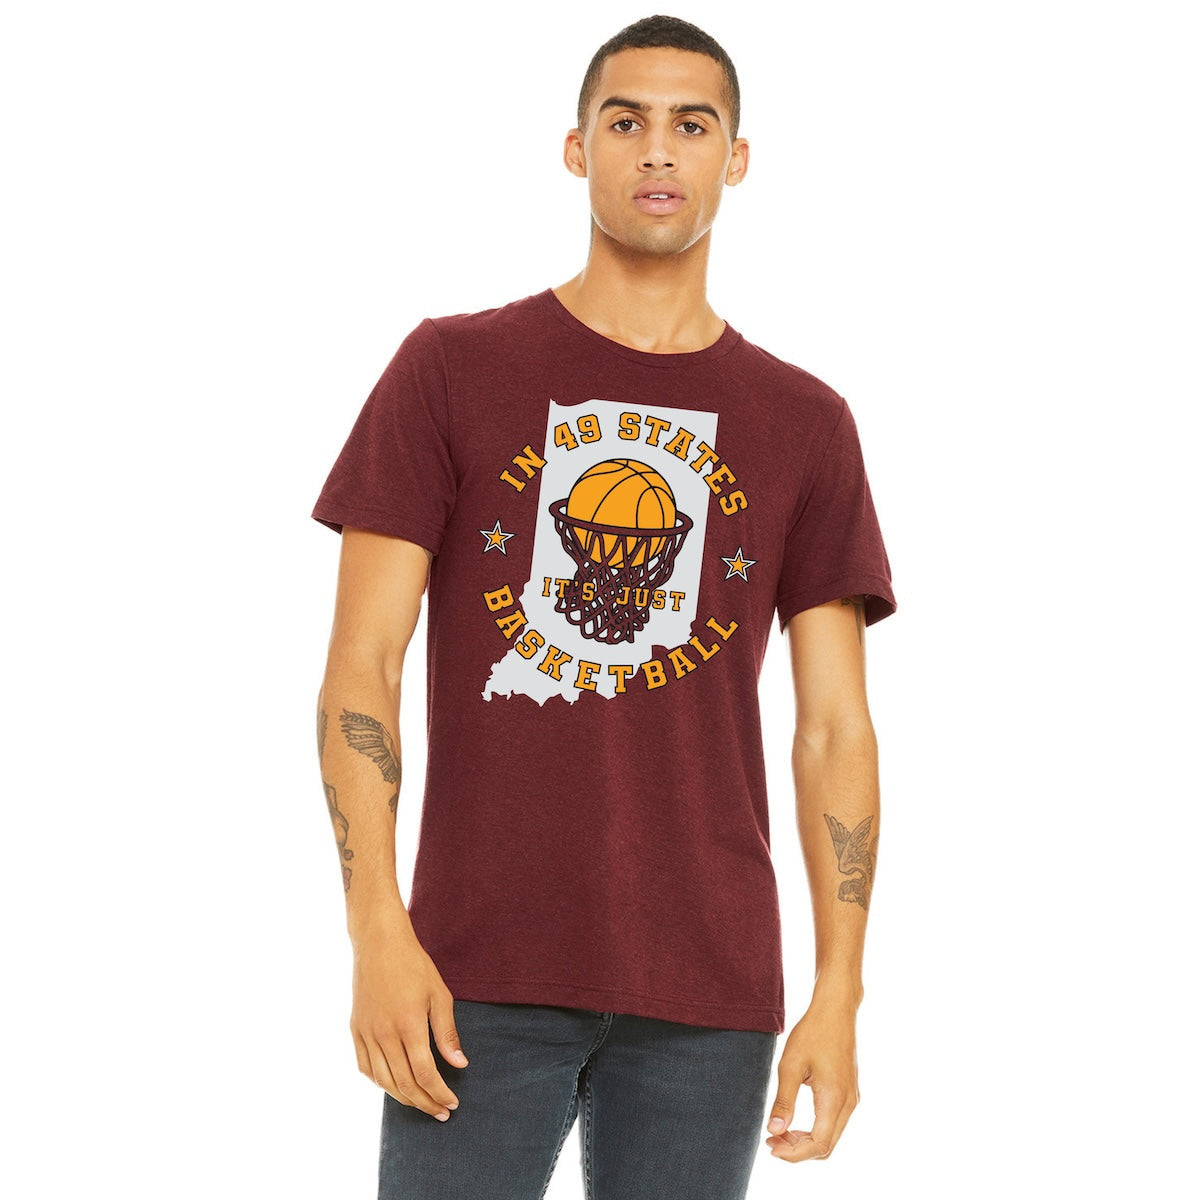 In 49 States Unisex Triblend Cotton T-shirt - Avenue Clothing Company 